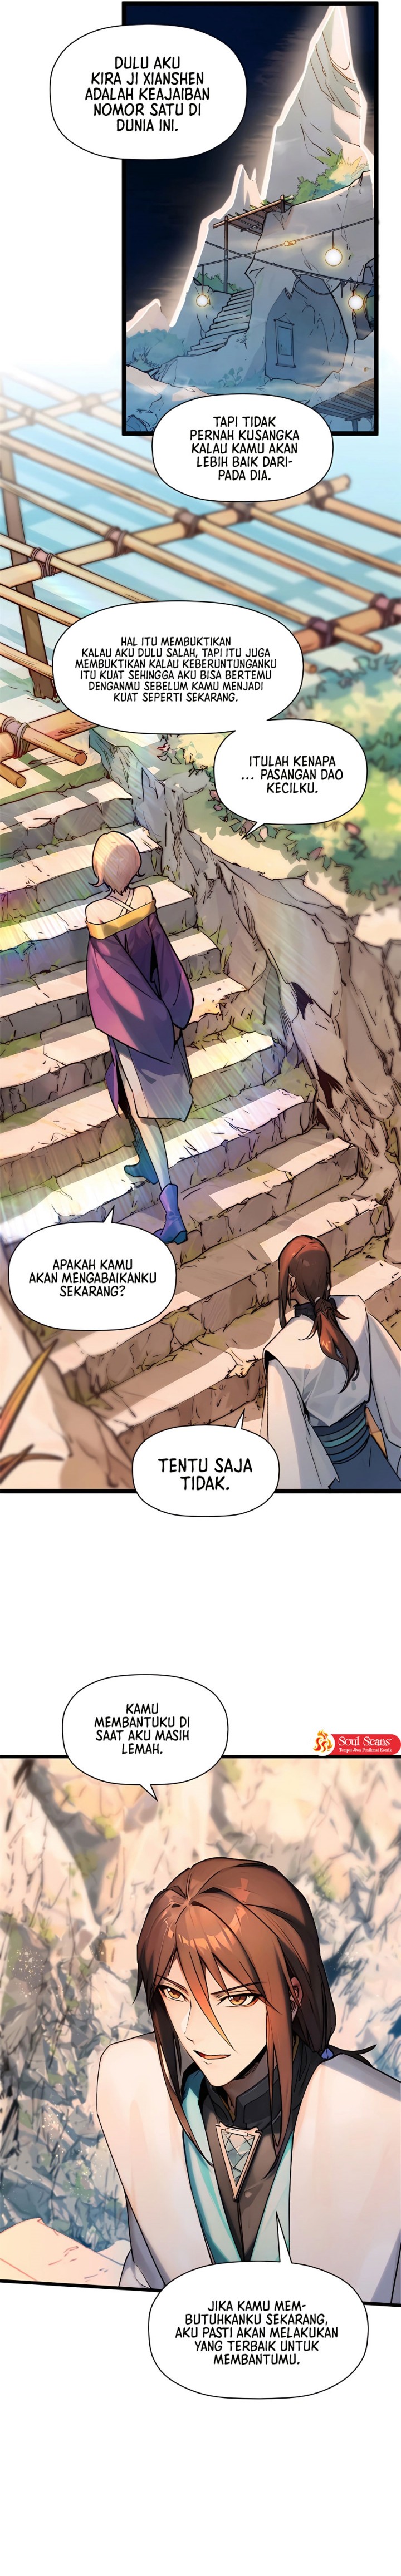 Dilarang COPAS - situs resmi www.mangacanblog.com - Komik top tier providence secretly cultivate for a thousand years 150 - chapter 150 151 Indonesia top tier providence secretly cultivate for a thousand years 150 - chapter 150 Terbaru 13|Baca Manga Komik Indonesia|Mangacan